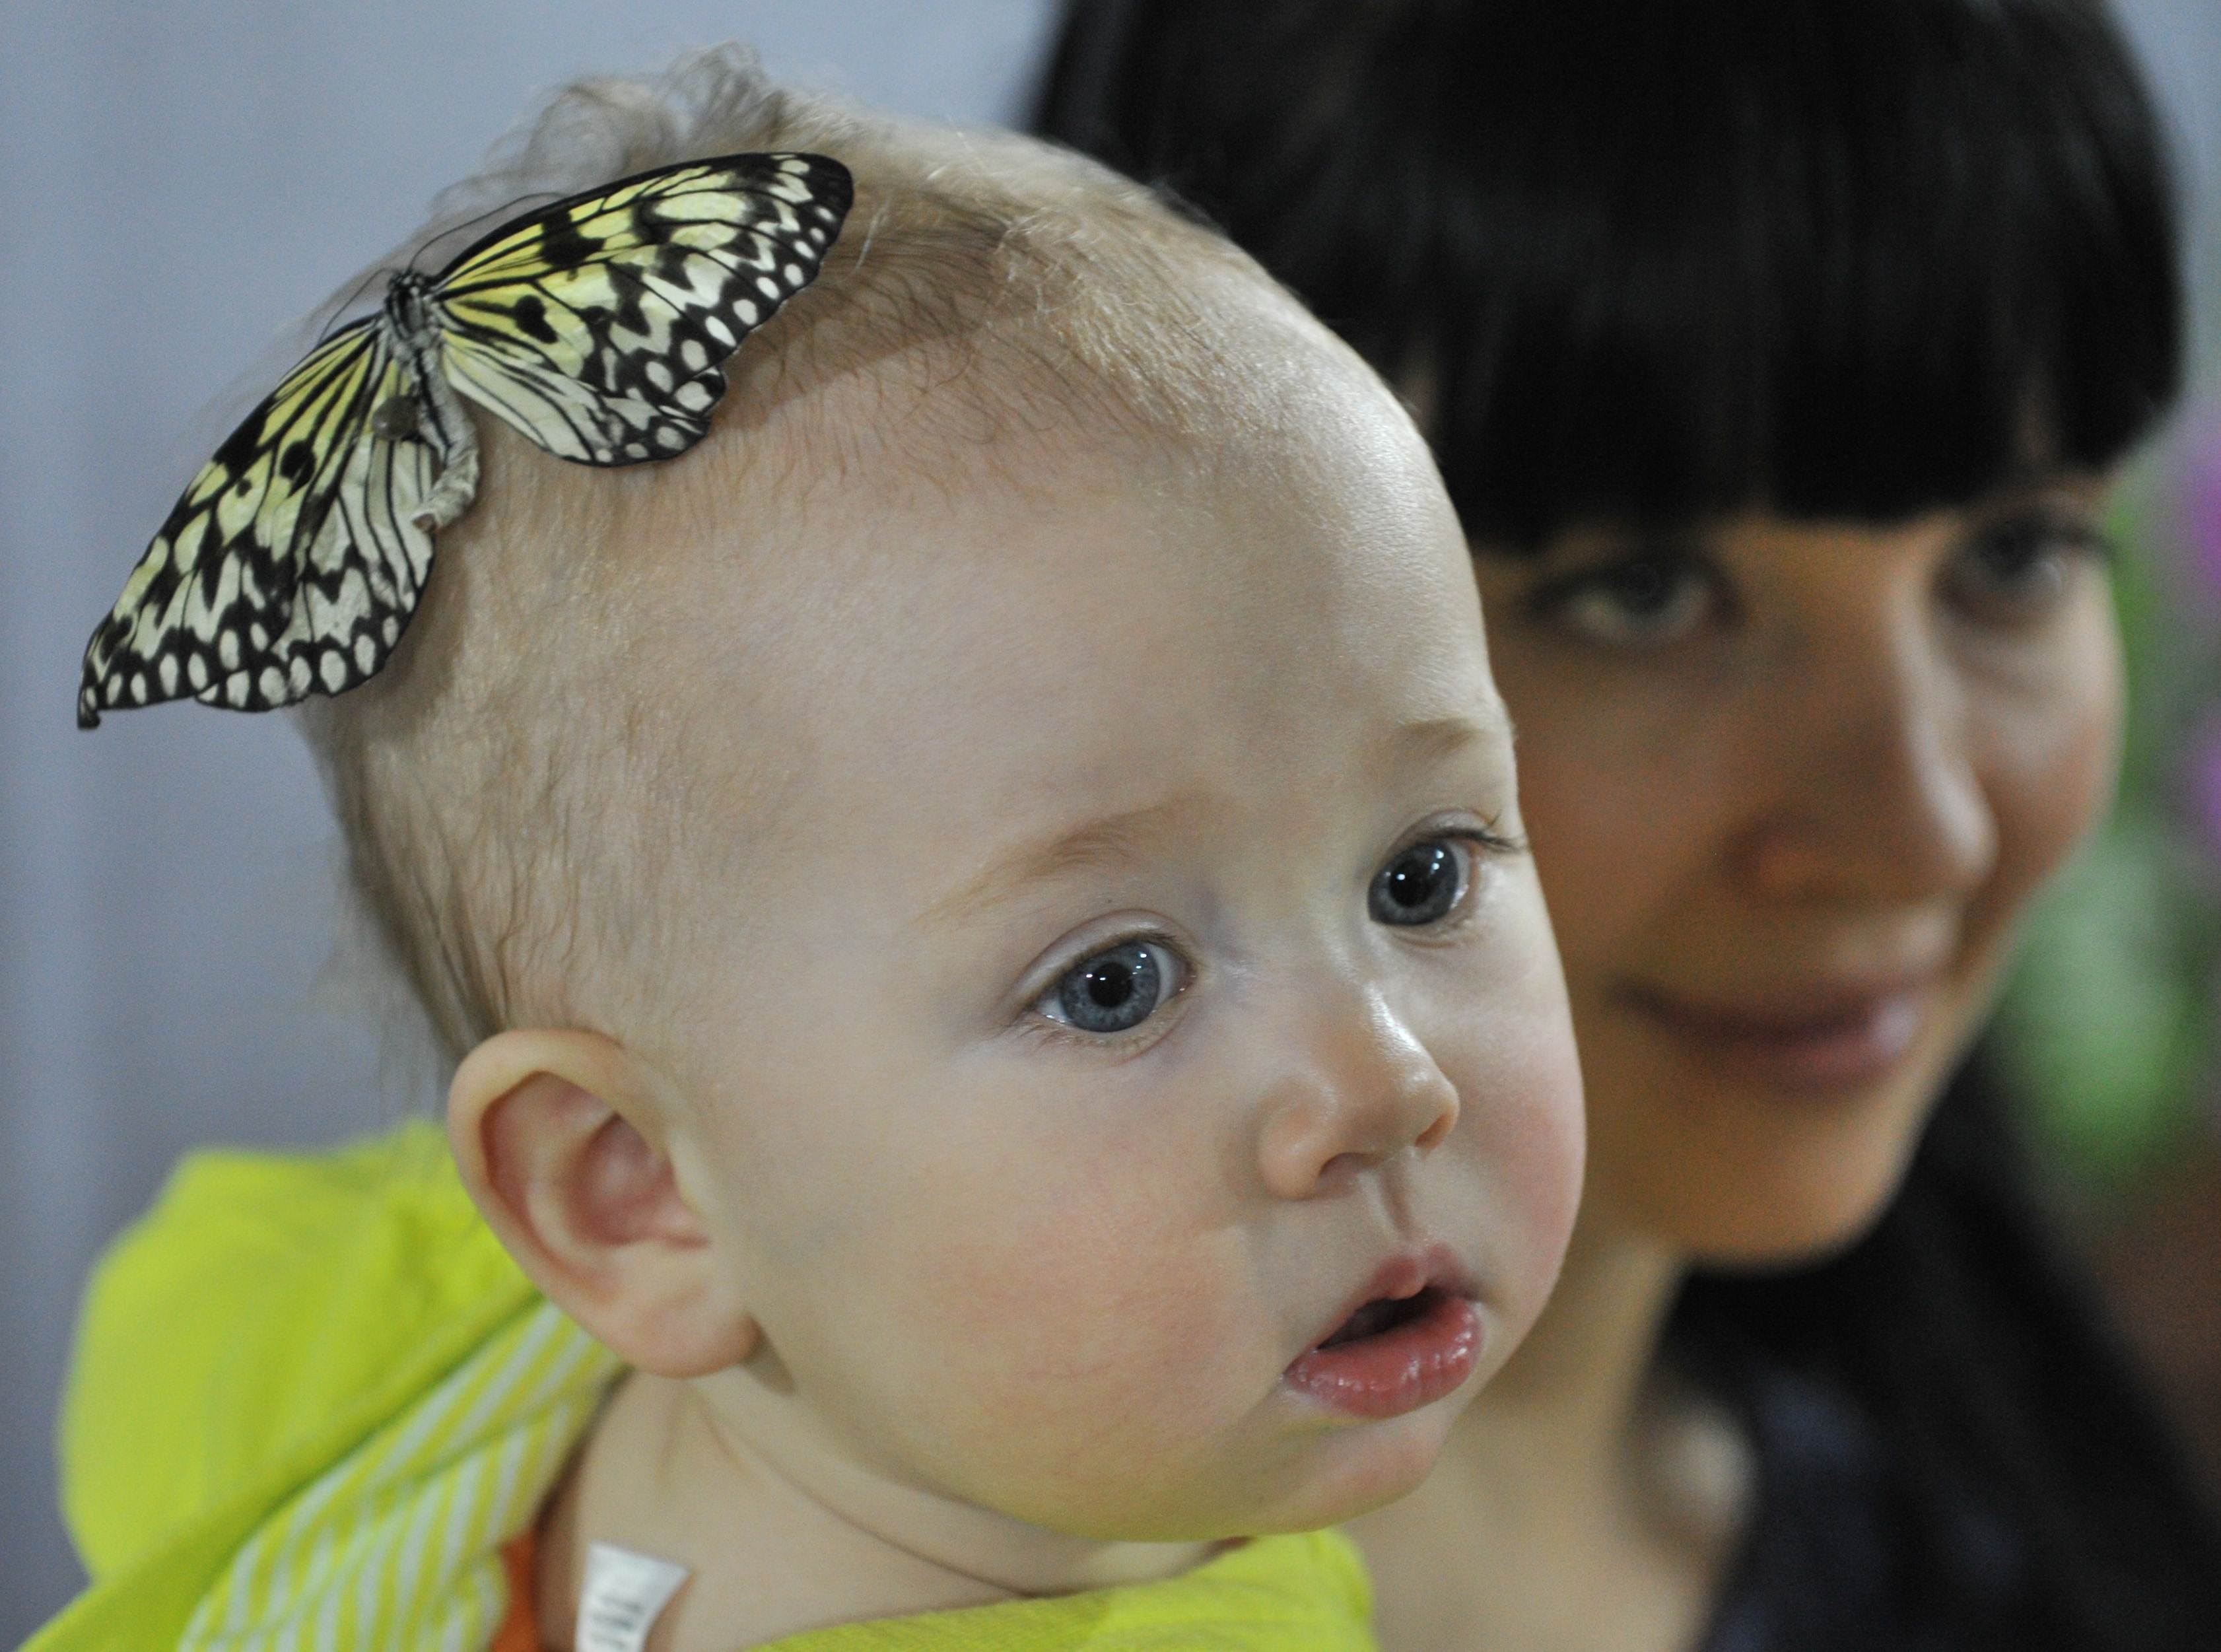 A butterfly lands on the head of a baby at an exhibition in Kyrgyzstan. Babies born today are expected to live longer than their parents. Photo: AFP